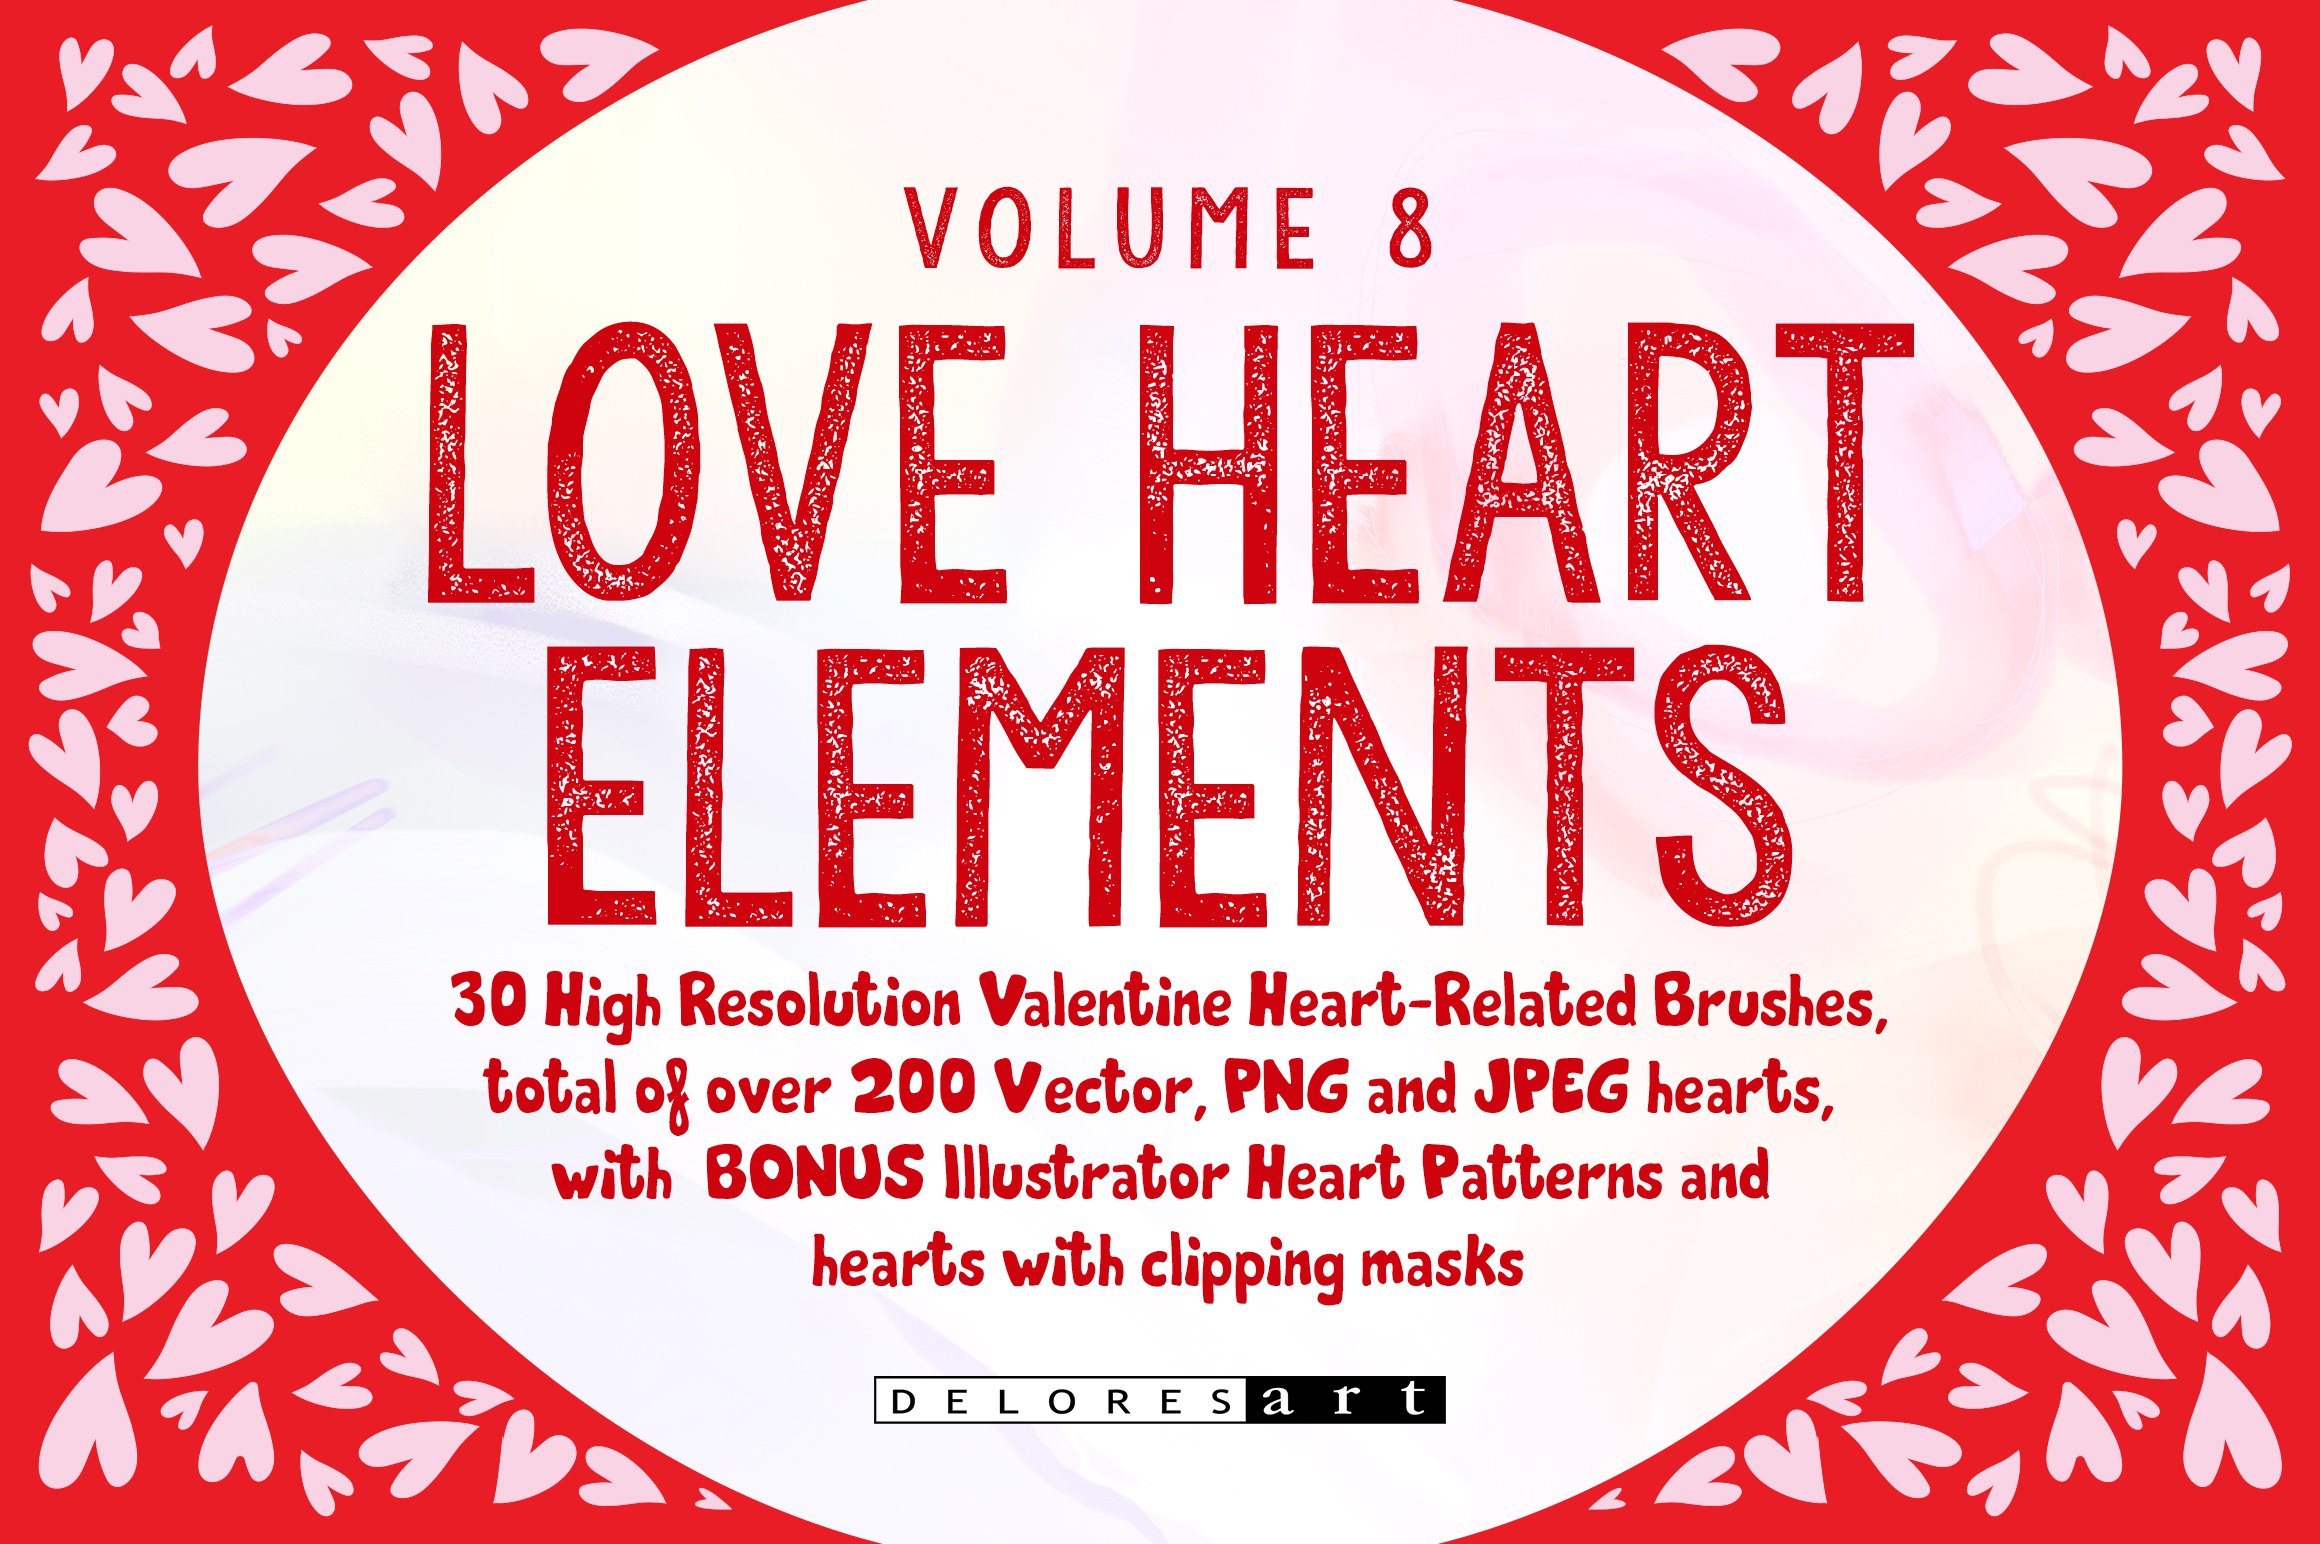 Valentine and Heart Elements to Lovecover image.